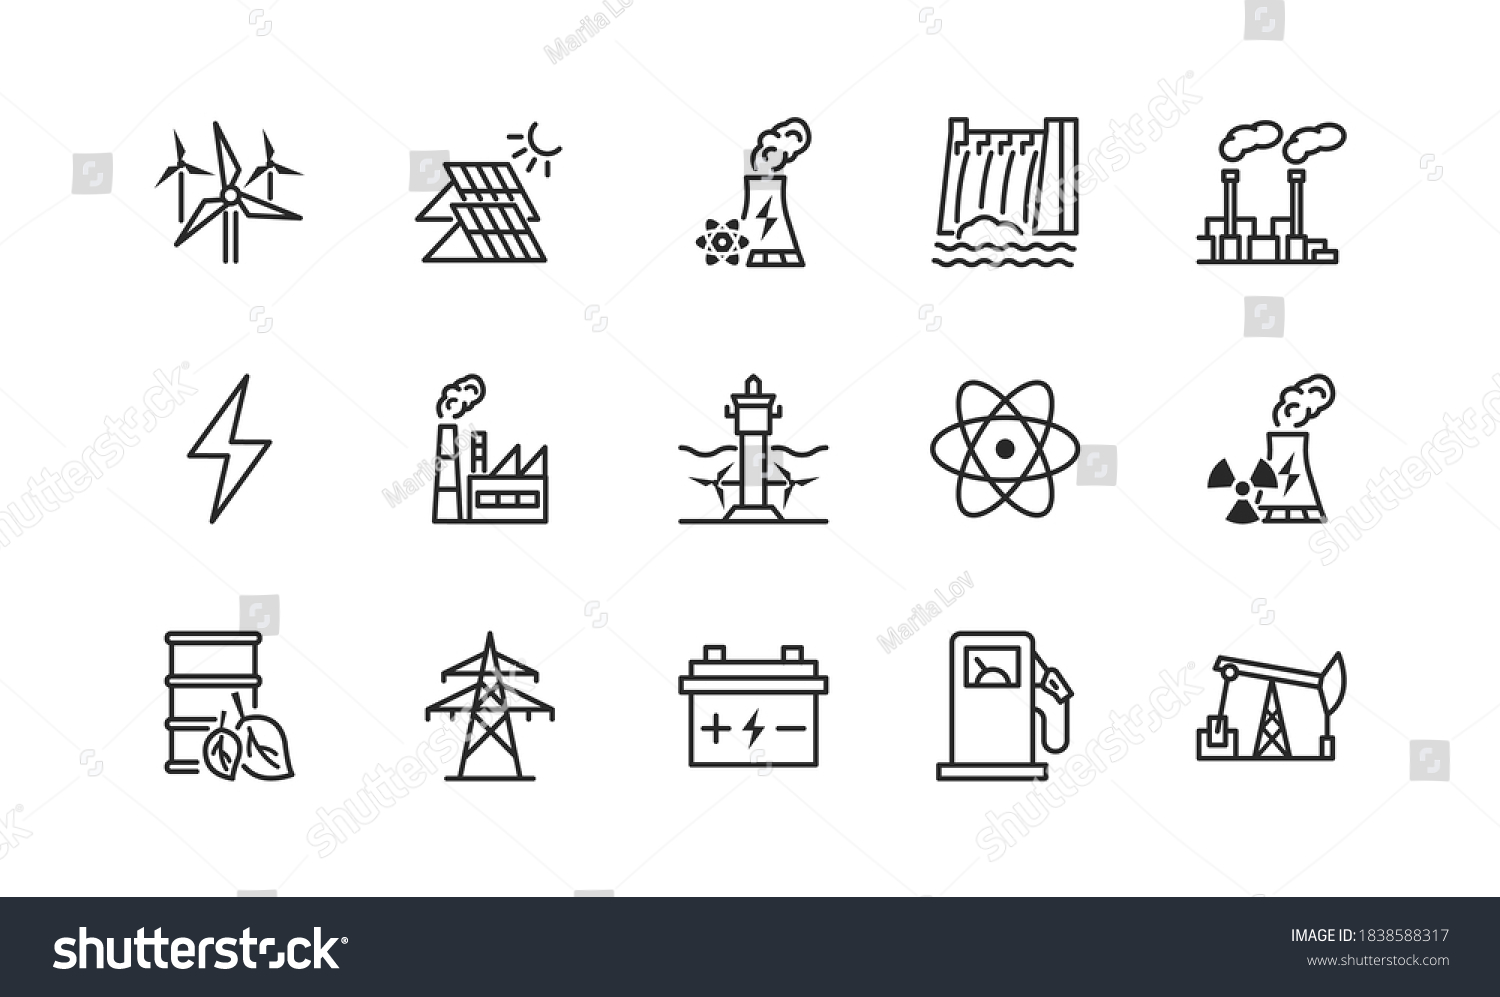 Power plant flat line icons set. Energy generation station. Vector illustration alternative renewable energy sources included solar, wind, hydro, tidal, geothermal and biomass Editable strokes #1838588317